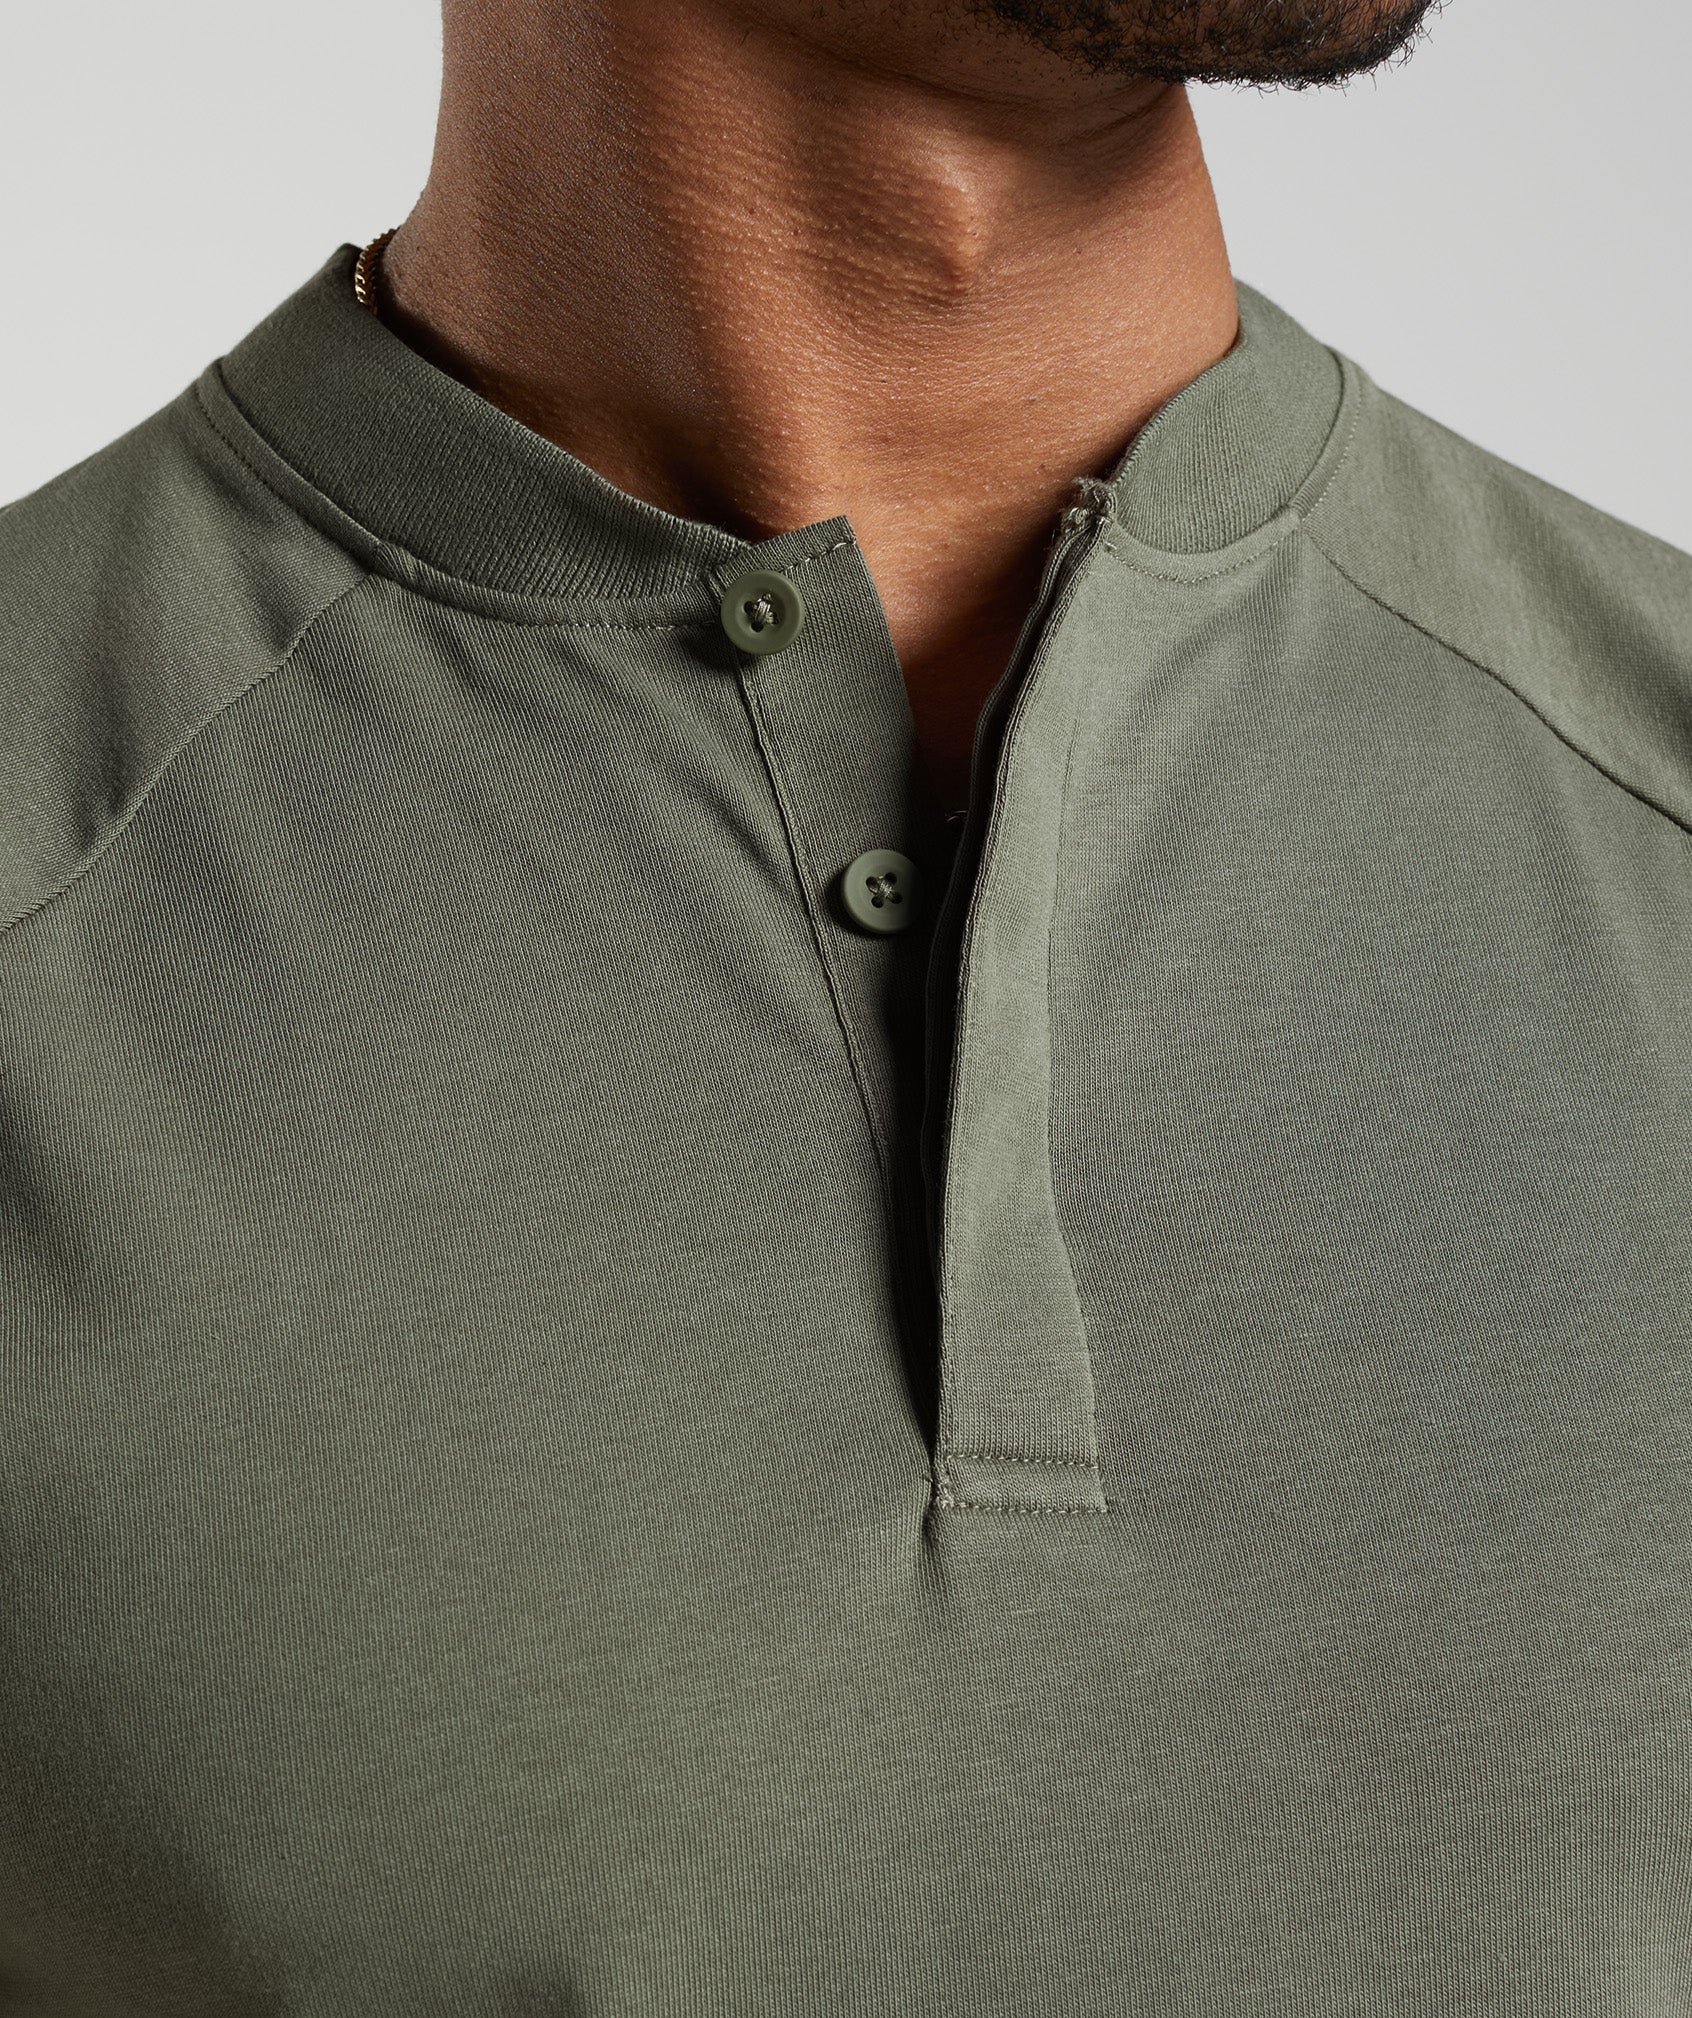 Rest Day Commute Polo Shirt in Dusty Olive - view 5